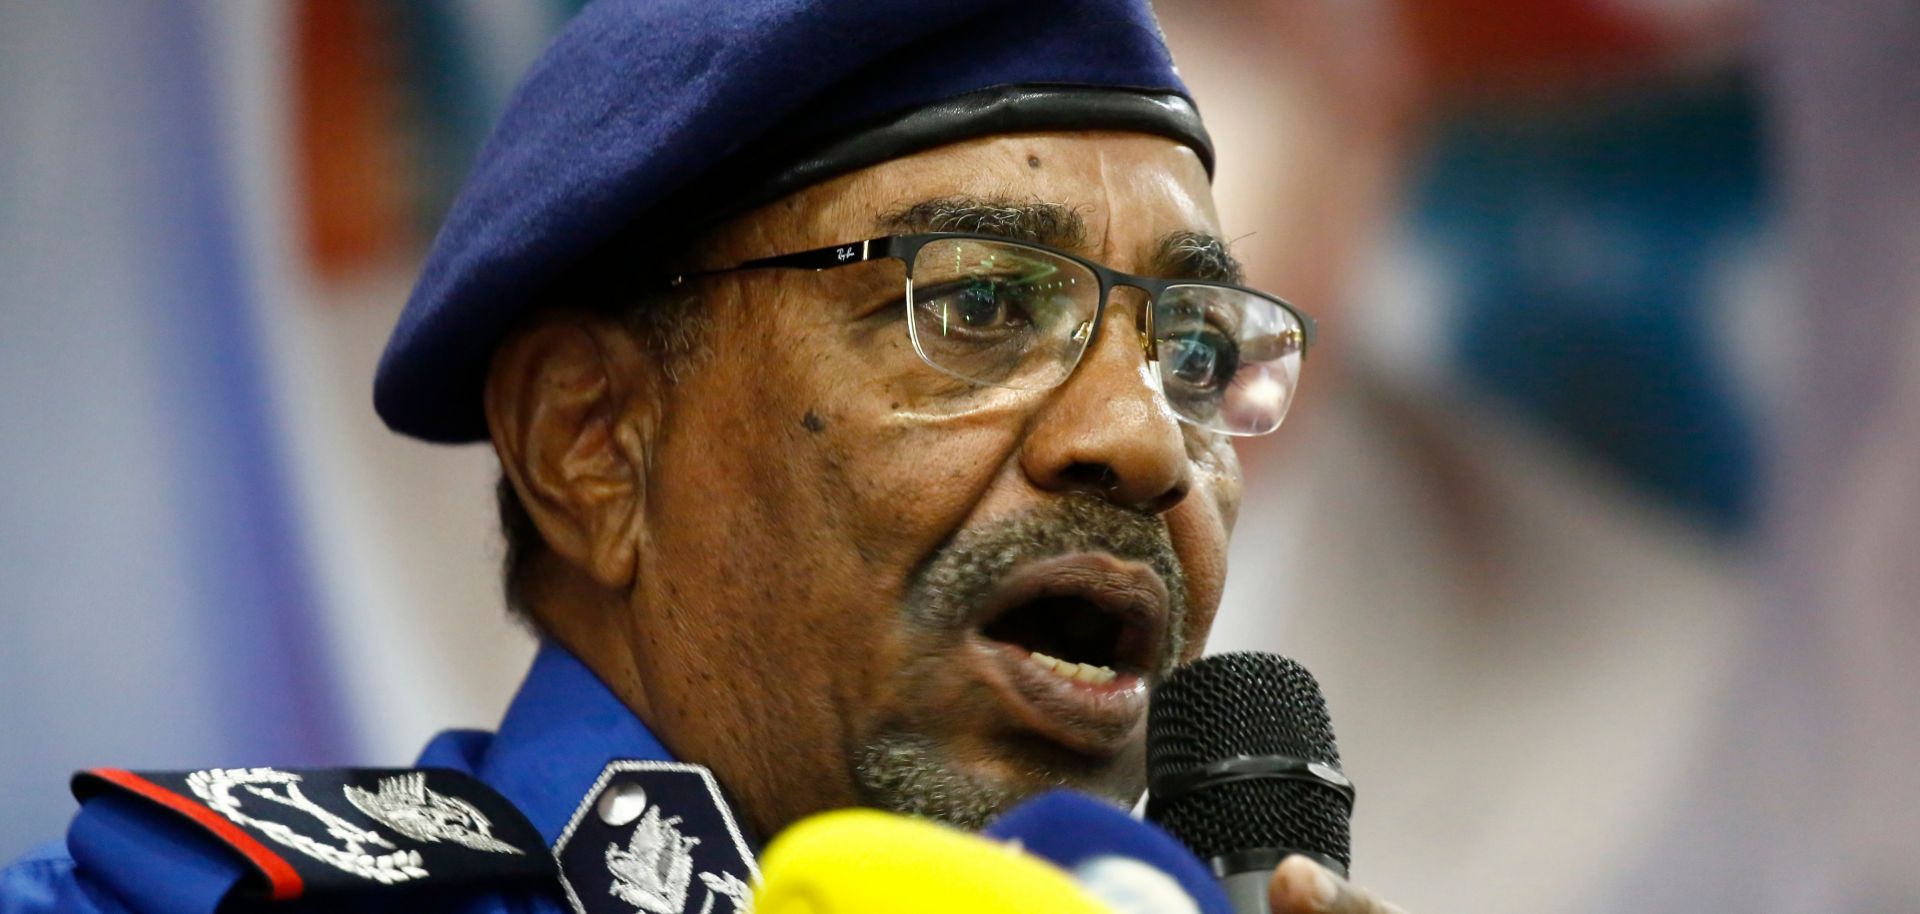 President Omar al Bashir has held the reins of power in Sudan since a coup in 1989. Persistent protests over economic conditions in the country are putting his government under pressure.